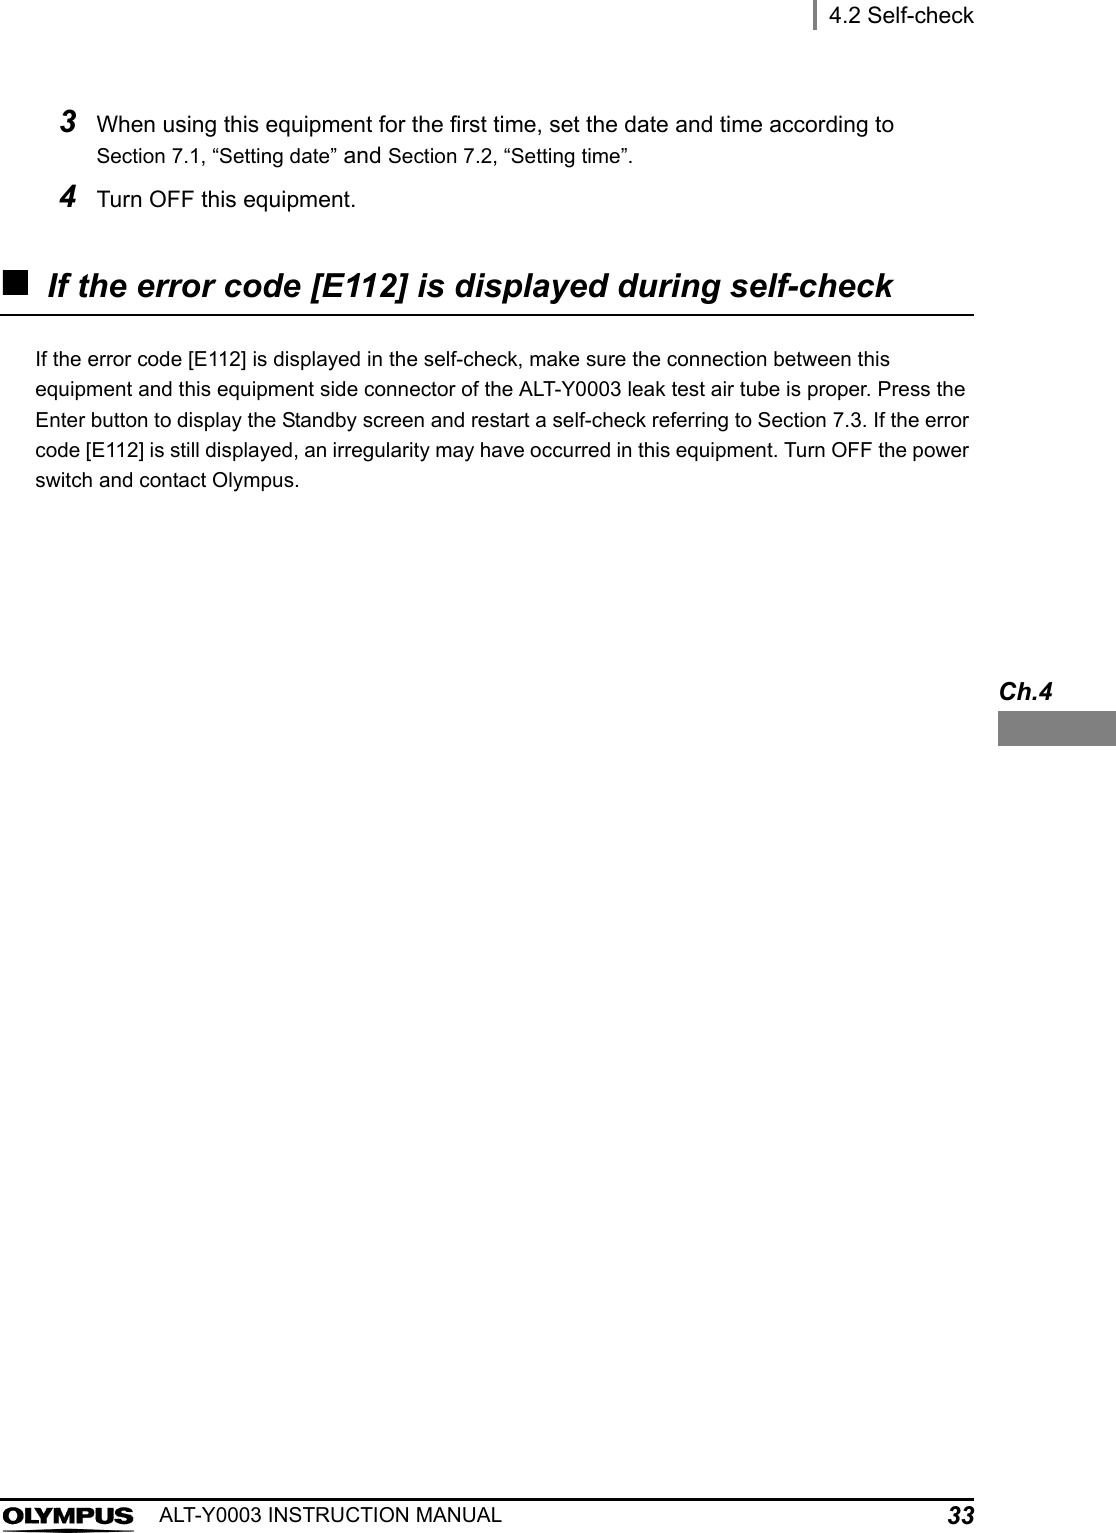 4.2 Self-check33ALT-Y0003 INSTRUCTION MANUALCh.4If the error code [E112] is displayed during self-checkIf the error code [E112] is displayed in the self-check, make sure the connection between this equipment and this equipment side connector of the ALT-Y0003 leak test air tube is proper. Press the Enter button to display the Standby screen and restart a self-check referring to Section 7.3. If the error code [E112] is still displayed, an irregularity may have occurred in this equipment. Turn OFF the power switch and contact Olympus.3When using this equipment for the first time, set the date and time according to Section 7.1, “Setting date” and Section 7.2, “Setting time”.4Turn OFF this equipment.